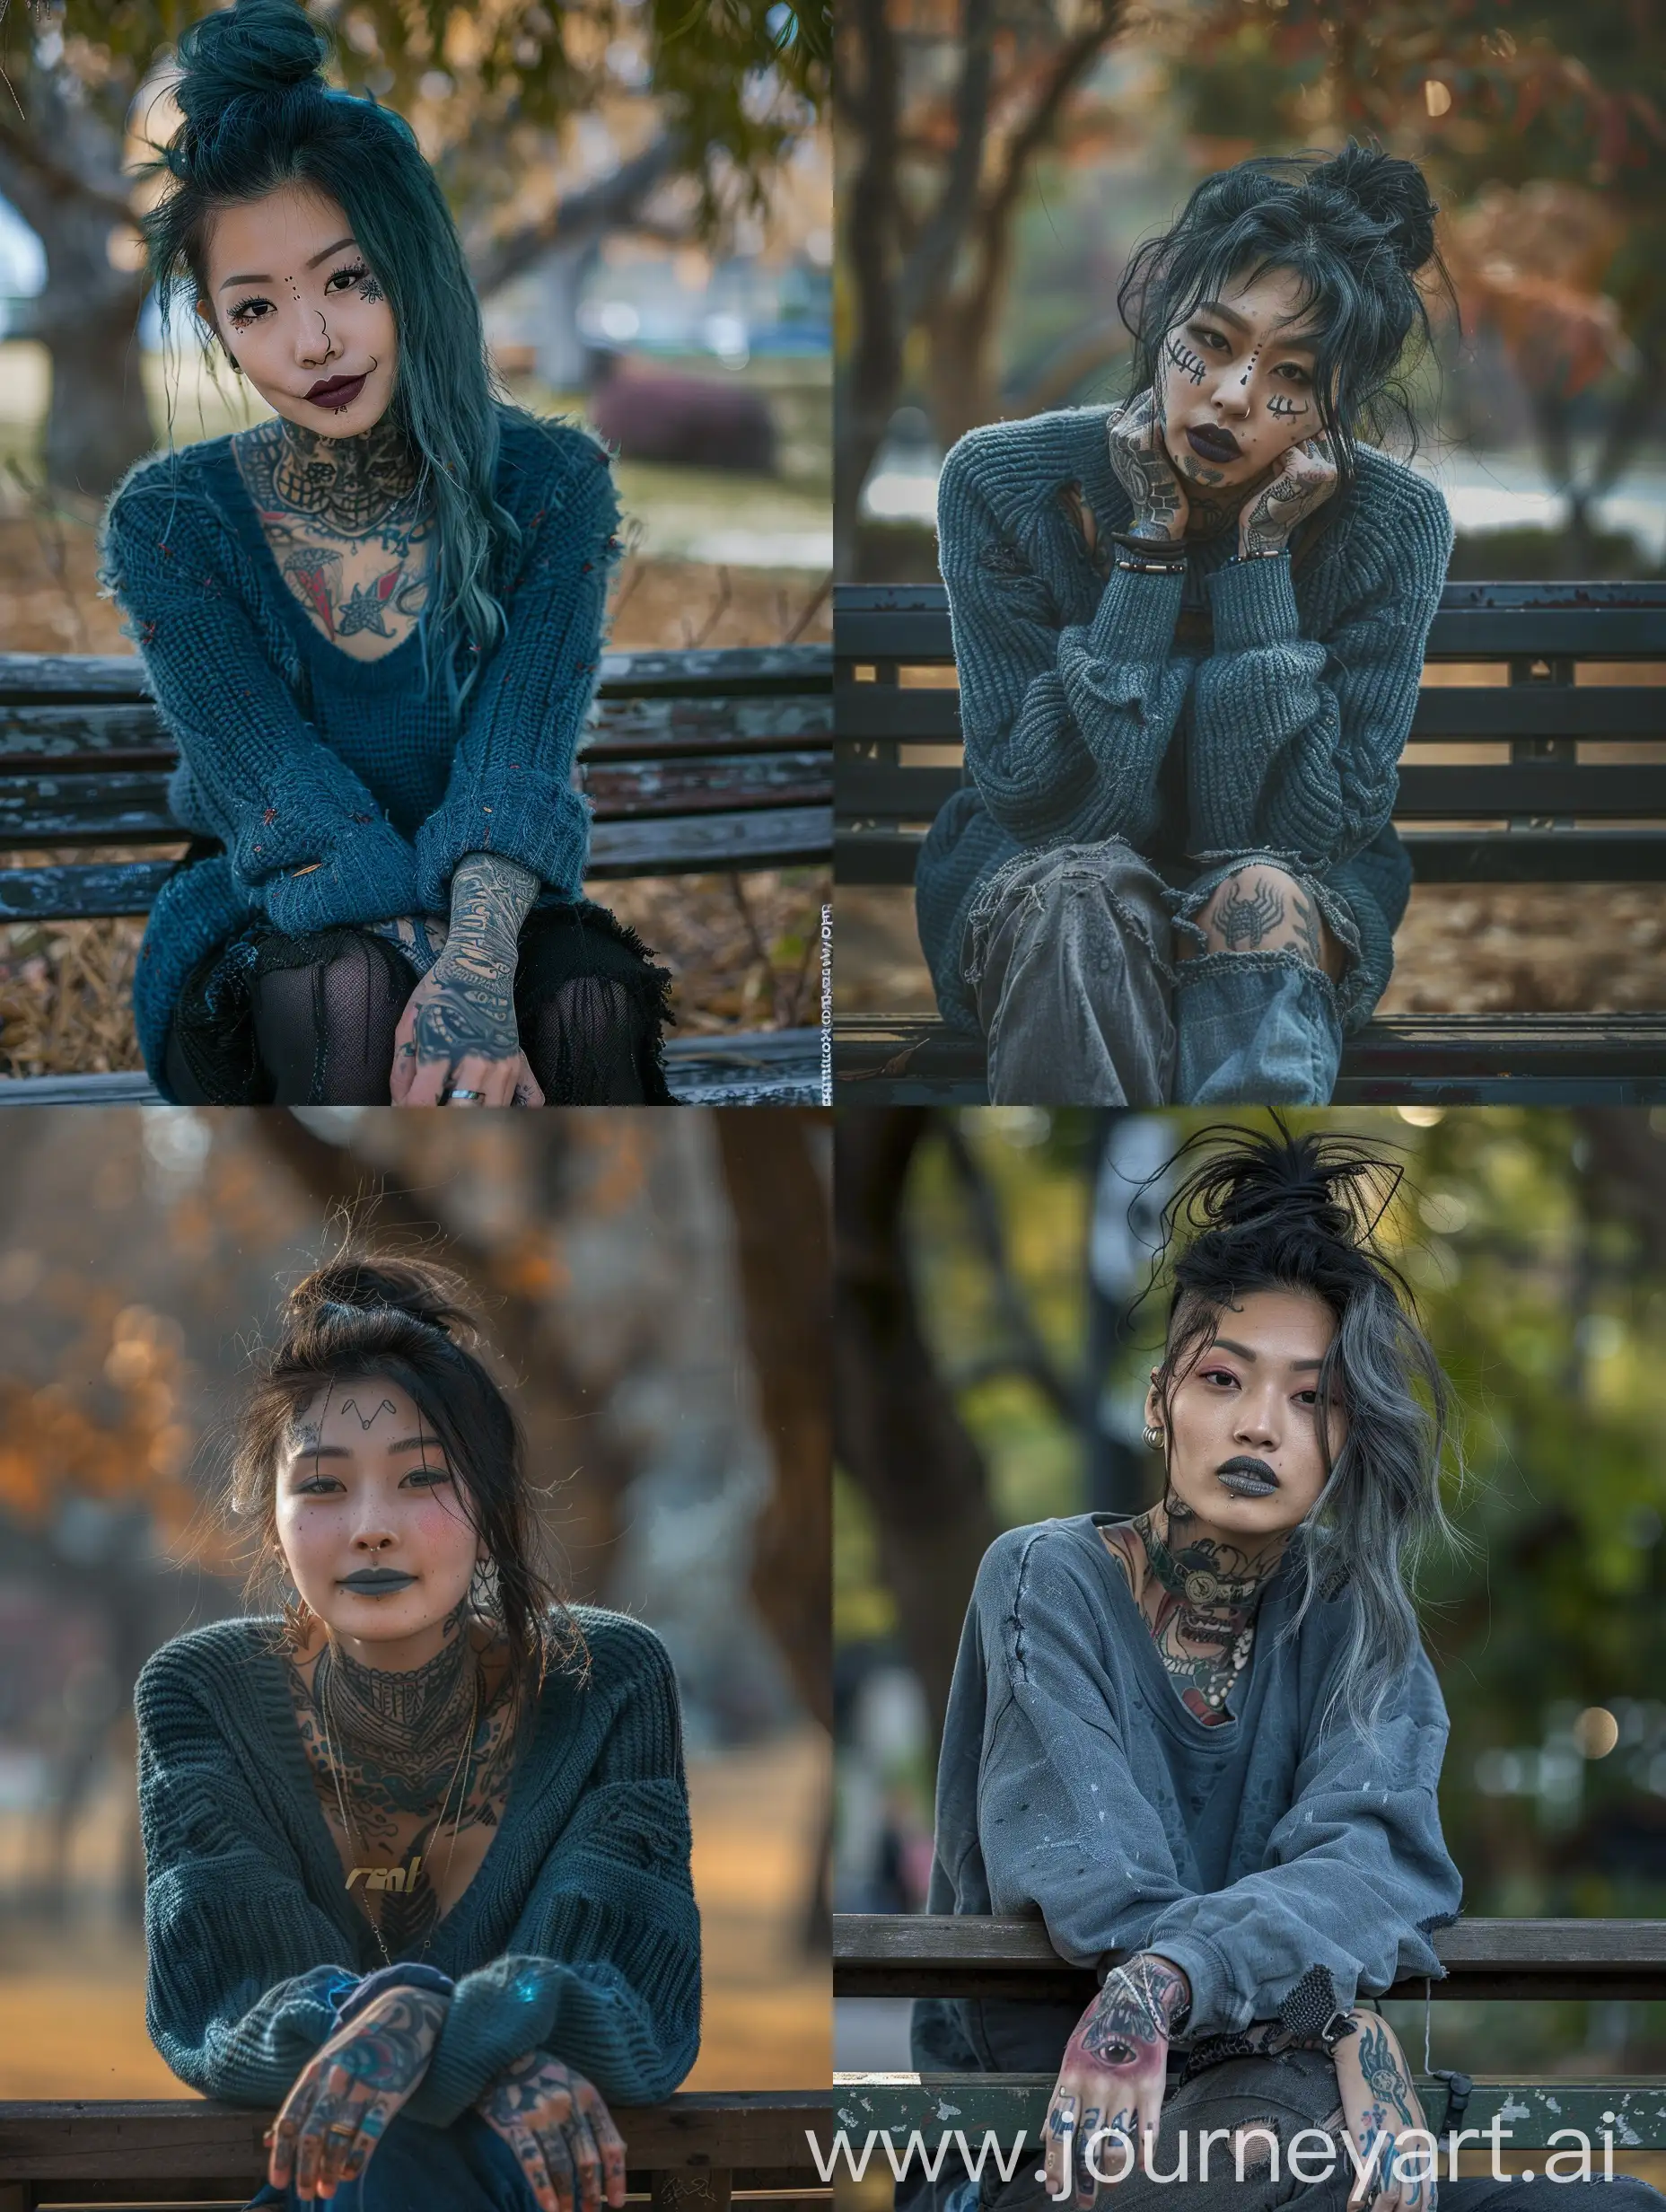 Punk-Korean-Woman-with-Homemade-Tattoos-Sitting-on-Park-Bench